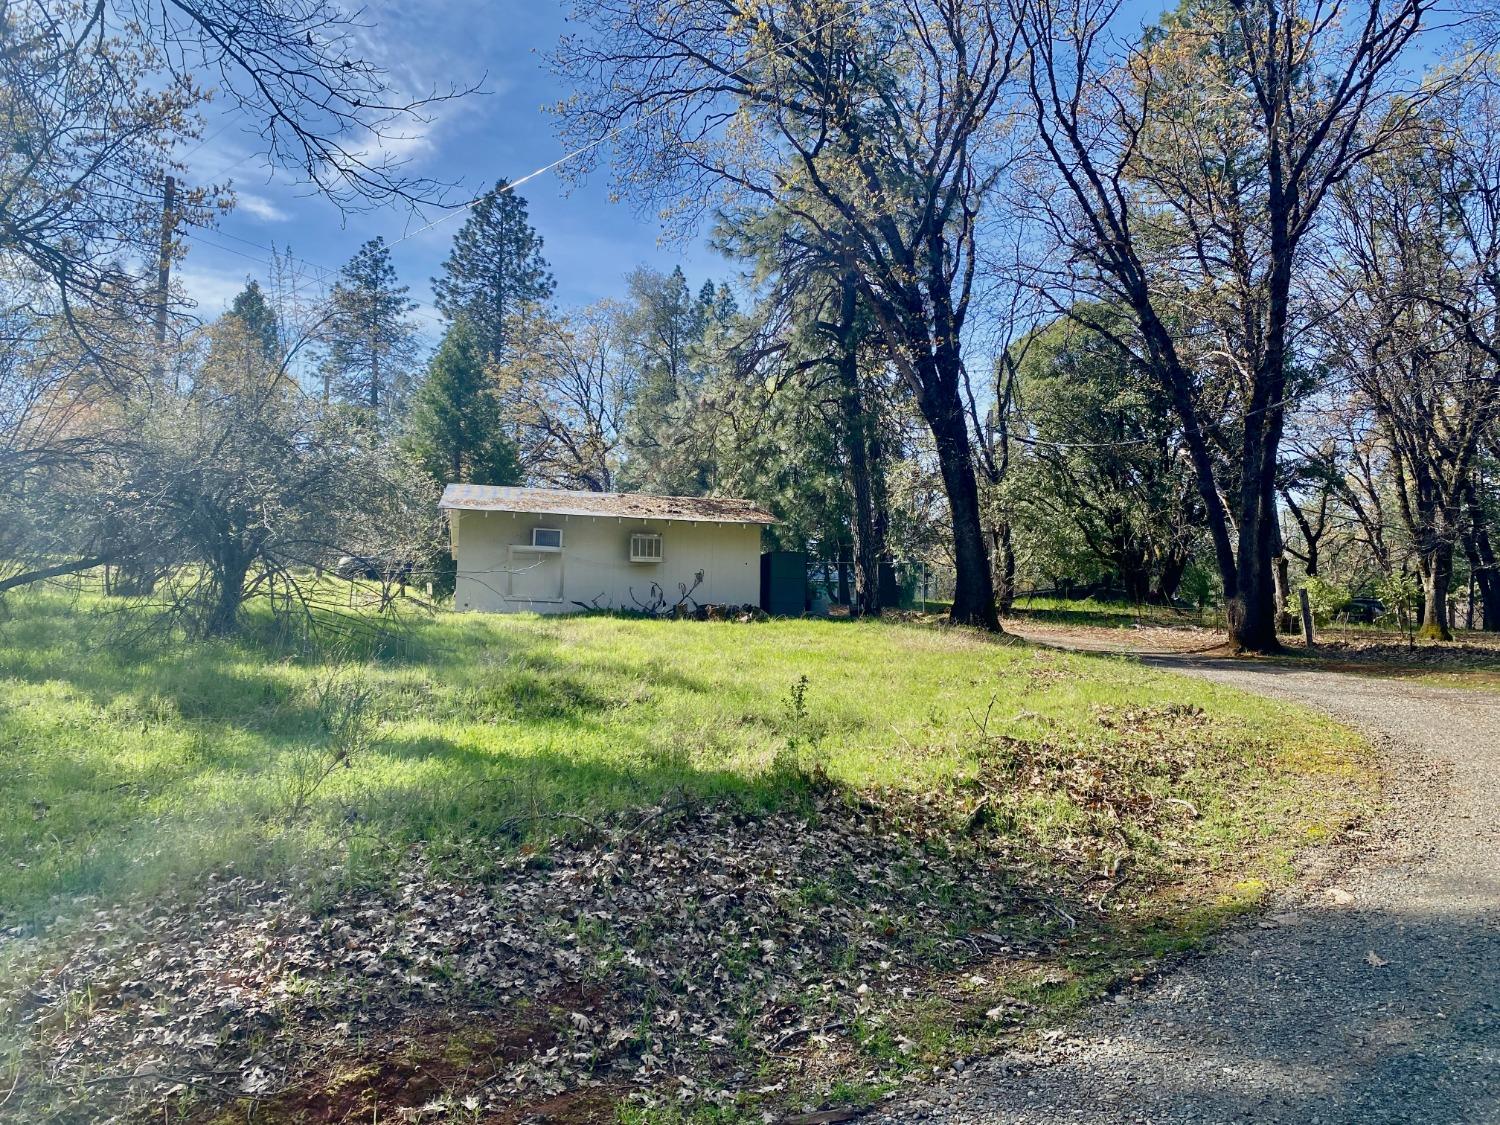 Photo of 21235 High Acres Rd in Colfax, CA